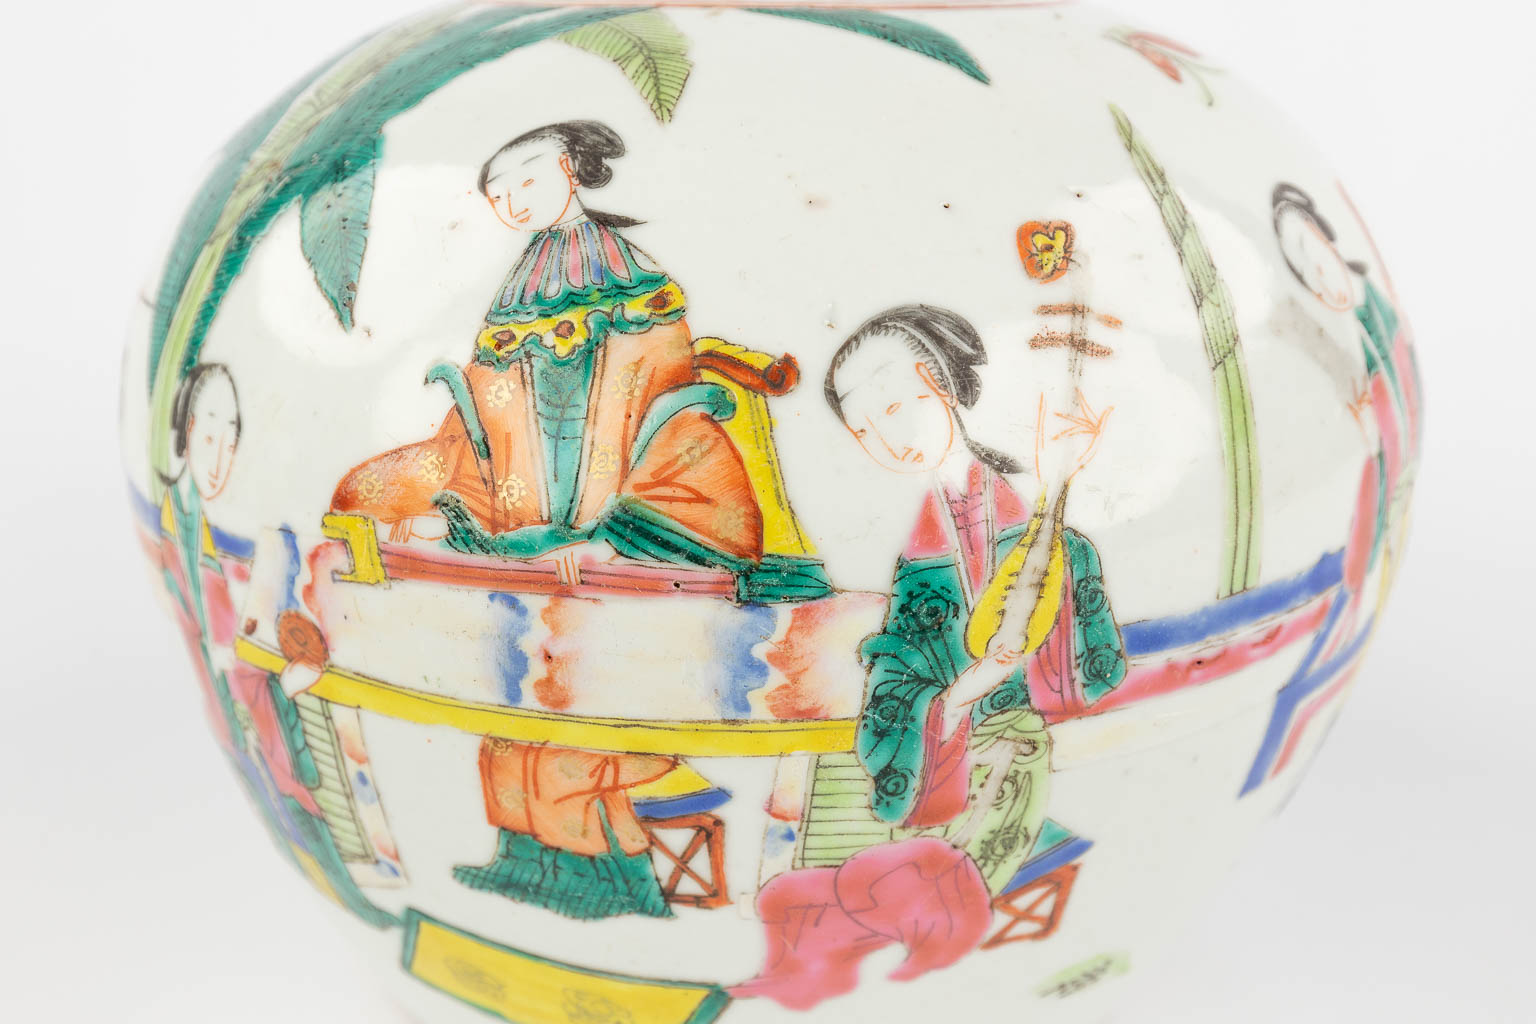 A Chinese vase and a jar with a lid, decorated with fauna and flora and ladies. 19th/20th C. (H: 34 x D: 18 cm)